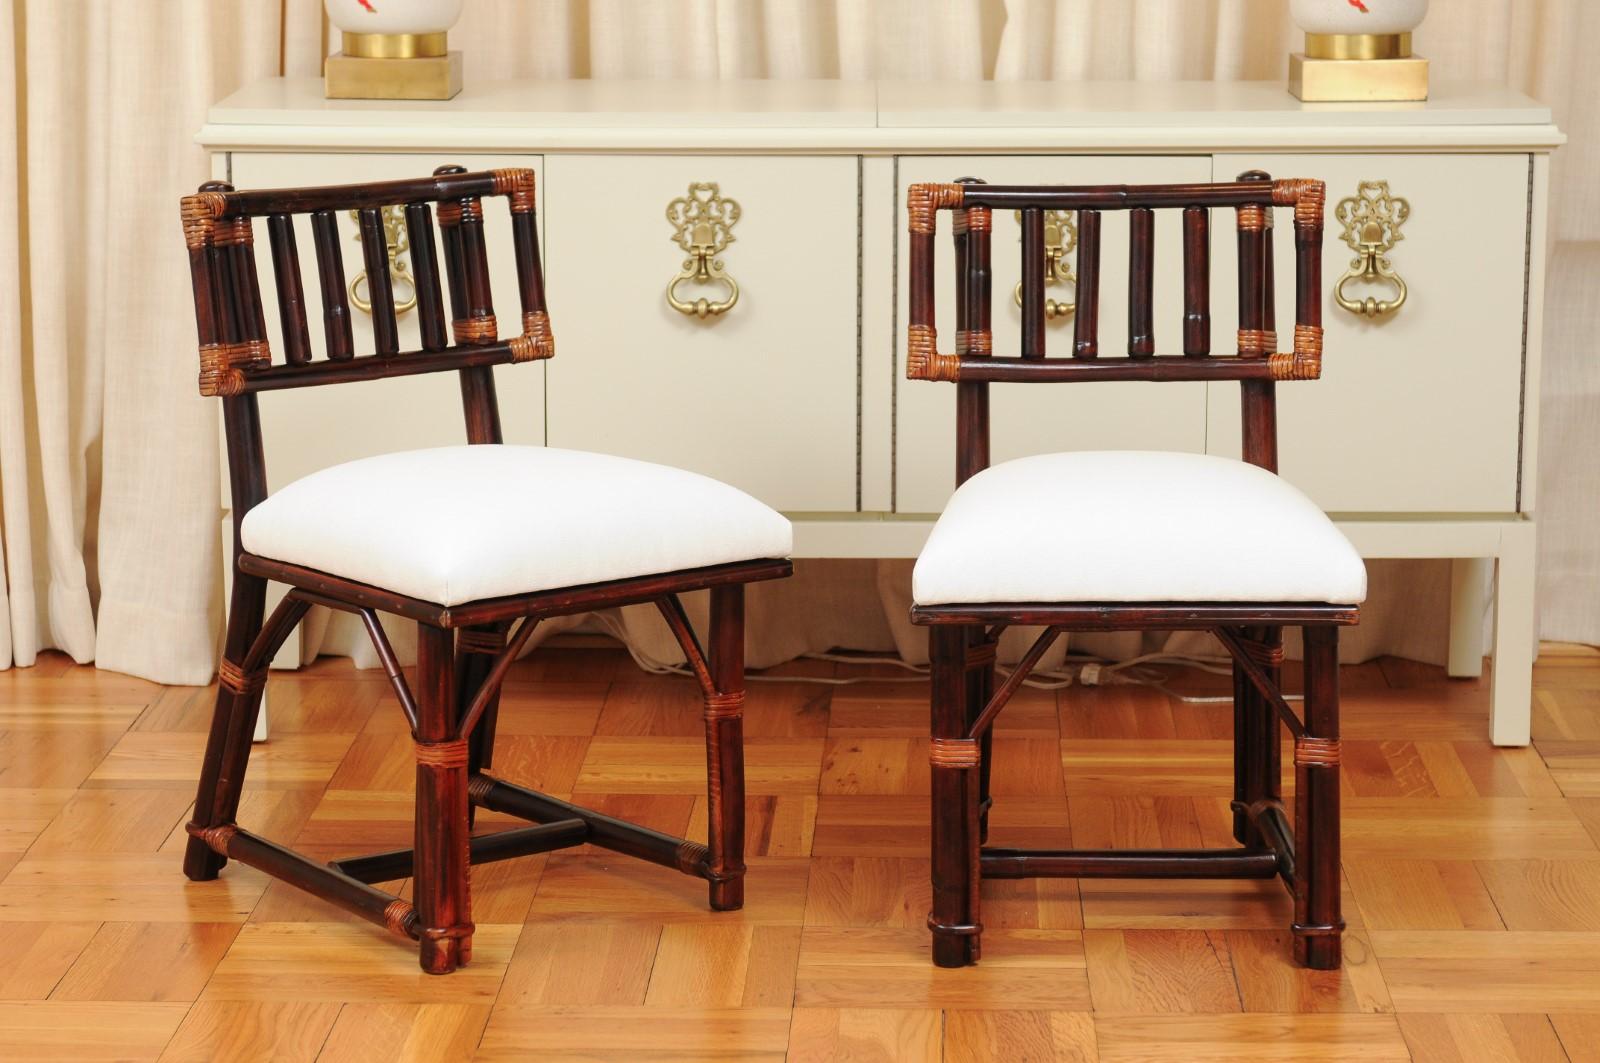 These magnificent dining chairs are shipped as professionally photographed and described in the listing narrative: Meticulously professionally restored and installation ready. Expert custom upholstery service is available.

An exceptional set of